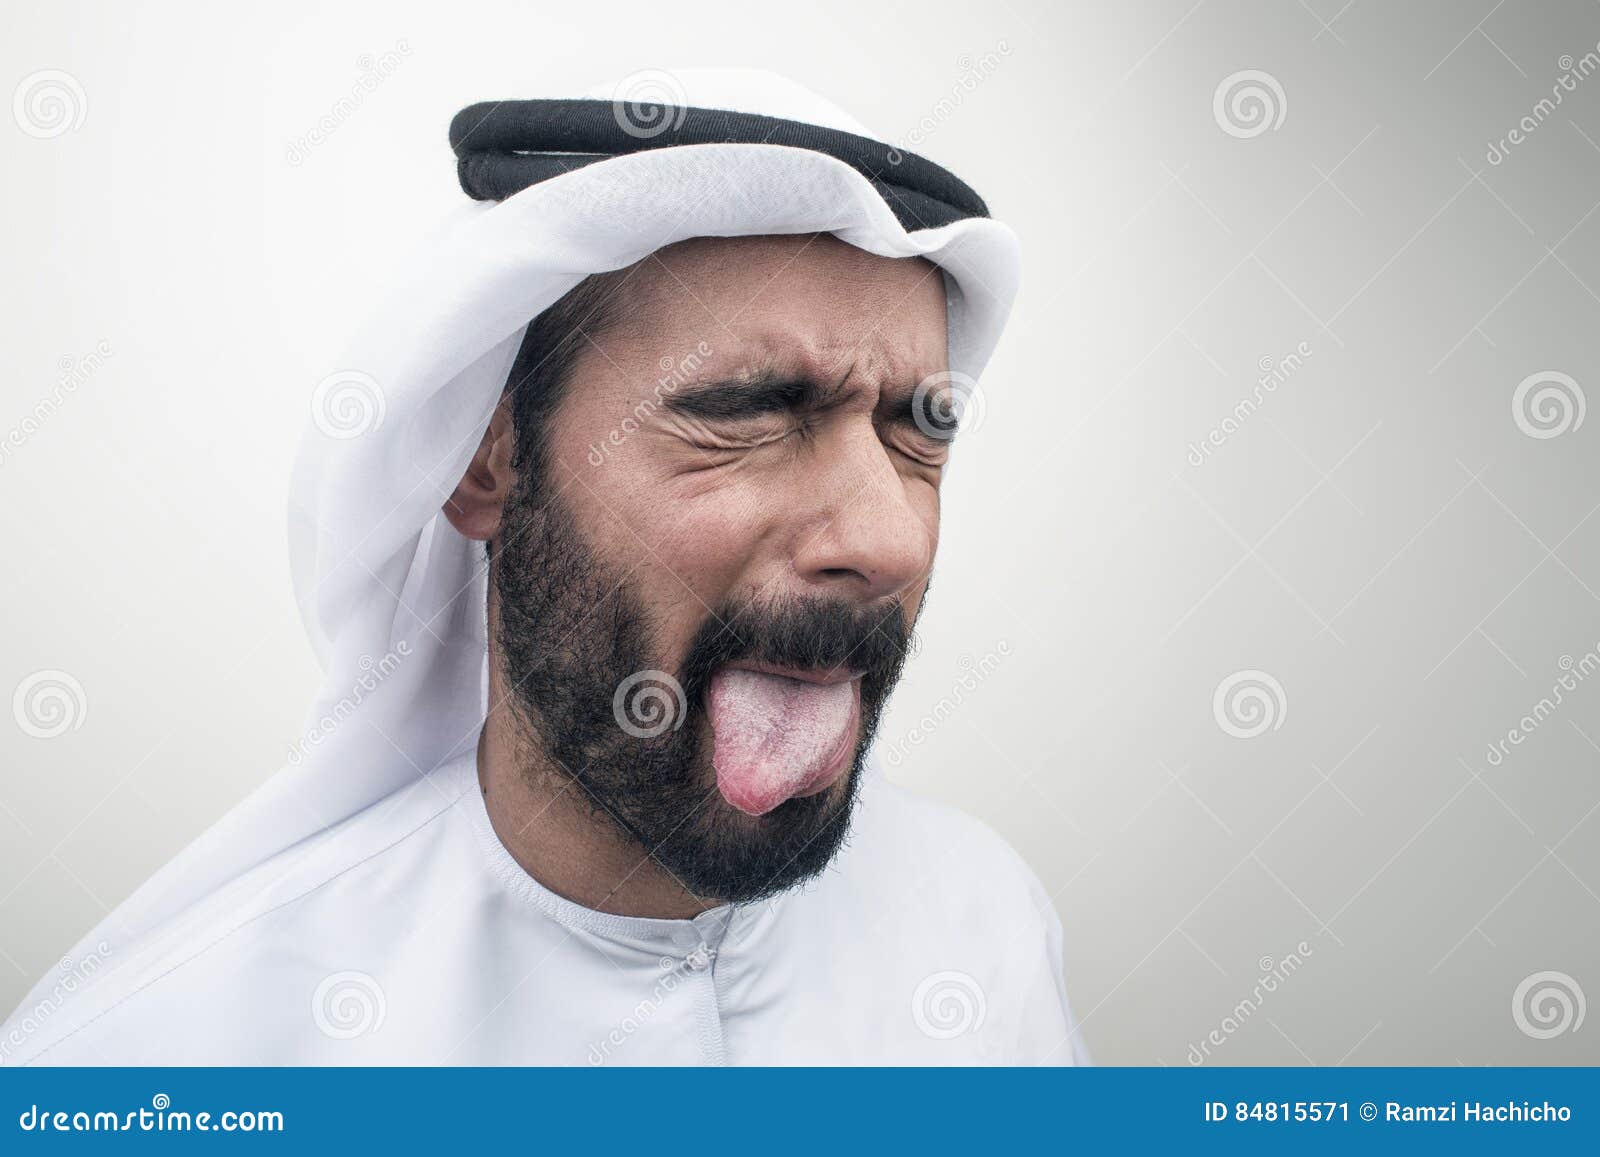 Arabian Man Sticking Out His Tongue, Arabian Guy with Funny Expression..  Stock Image - Image of middle, expressive: 84815571